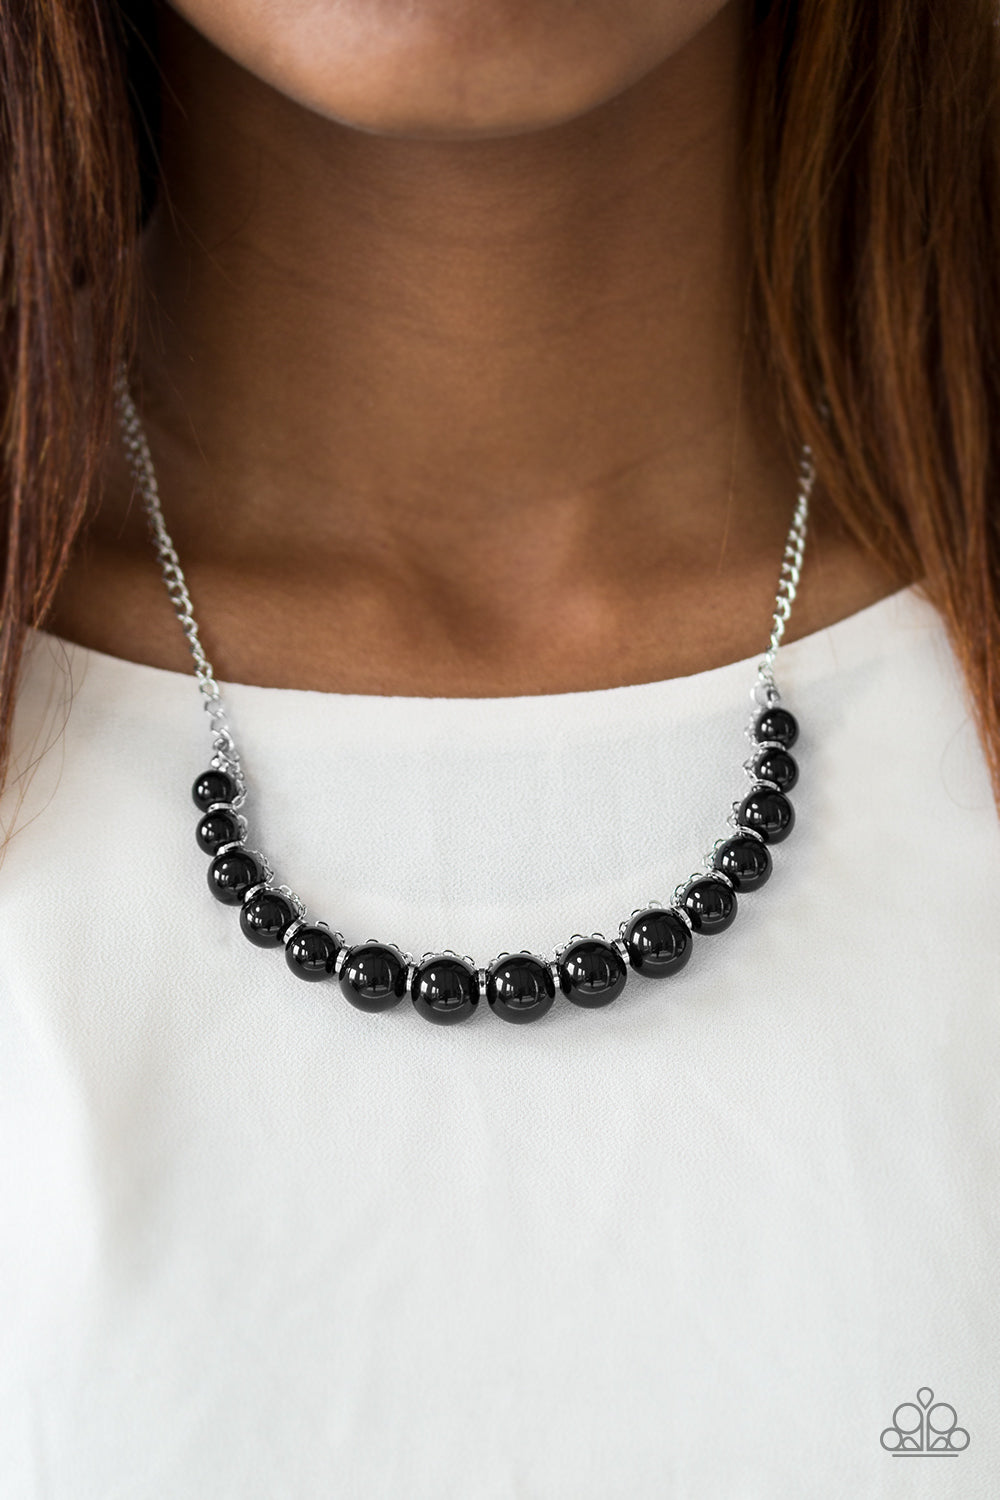 The Fashion Show Must Go On! Black Necklace Paparazzi Accessories